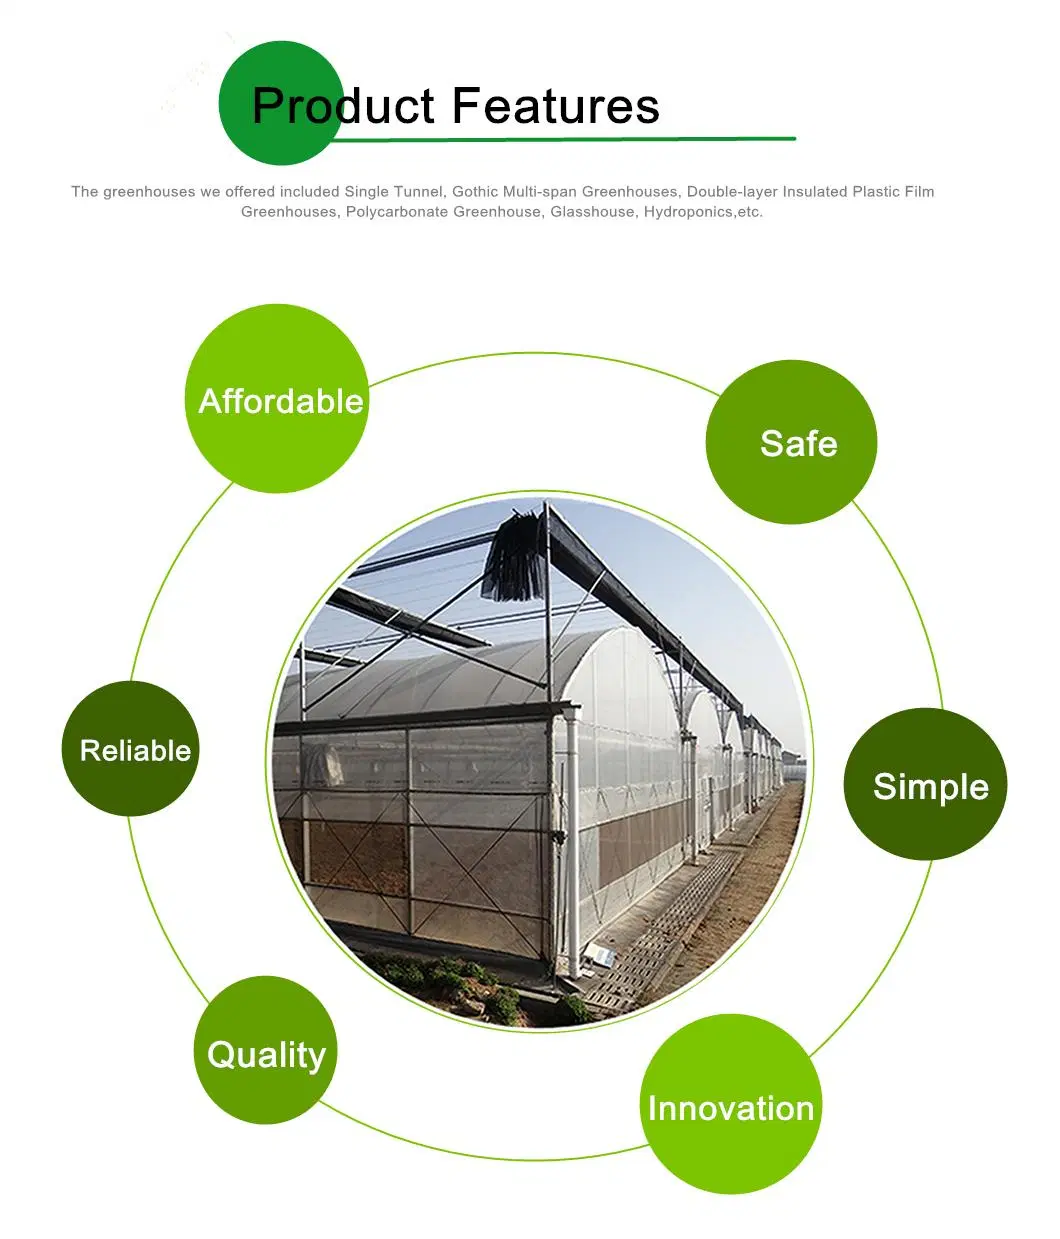 Cheap Roof Ventilation Dome Greenhouse Covered by Plastic Film with Auto Control System